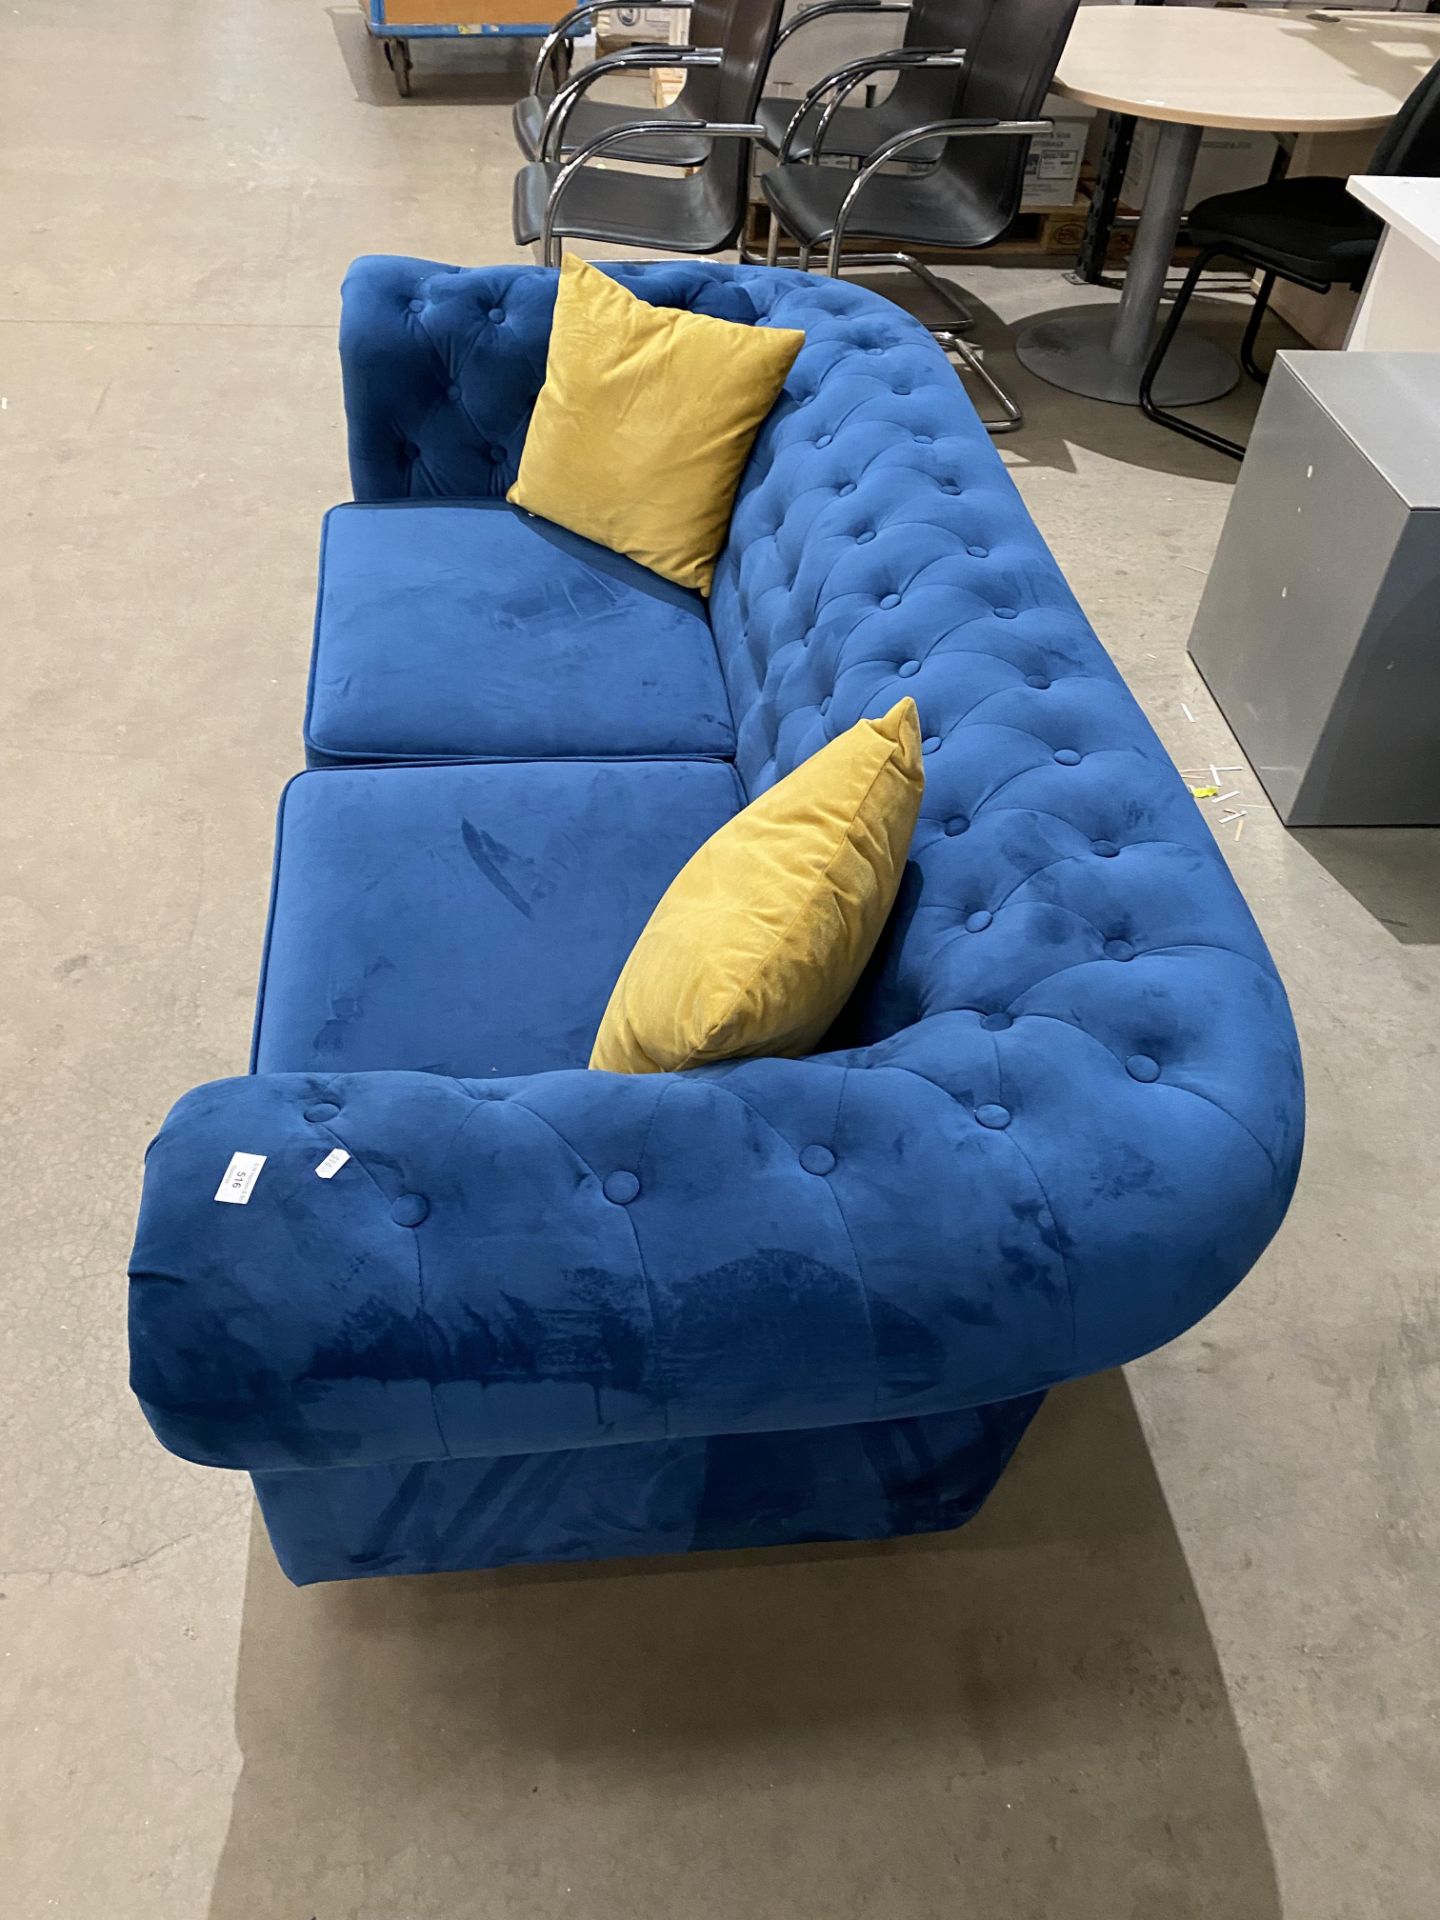 Blue upholstered button-backed Chesterfield style 2-seater sofa complete with cushions (saleroom - Image 7 of 11